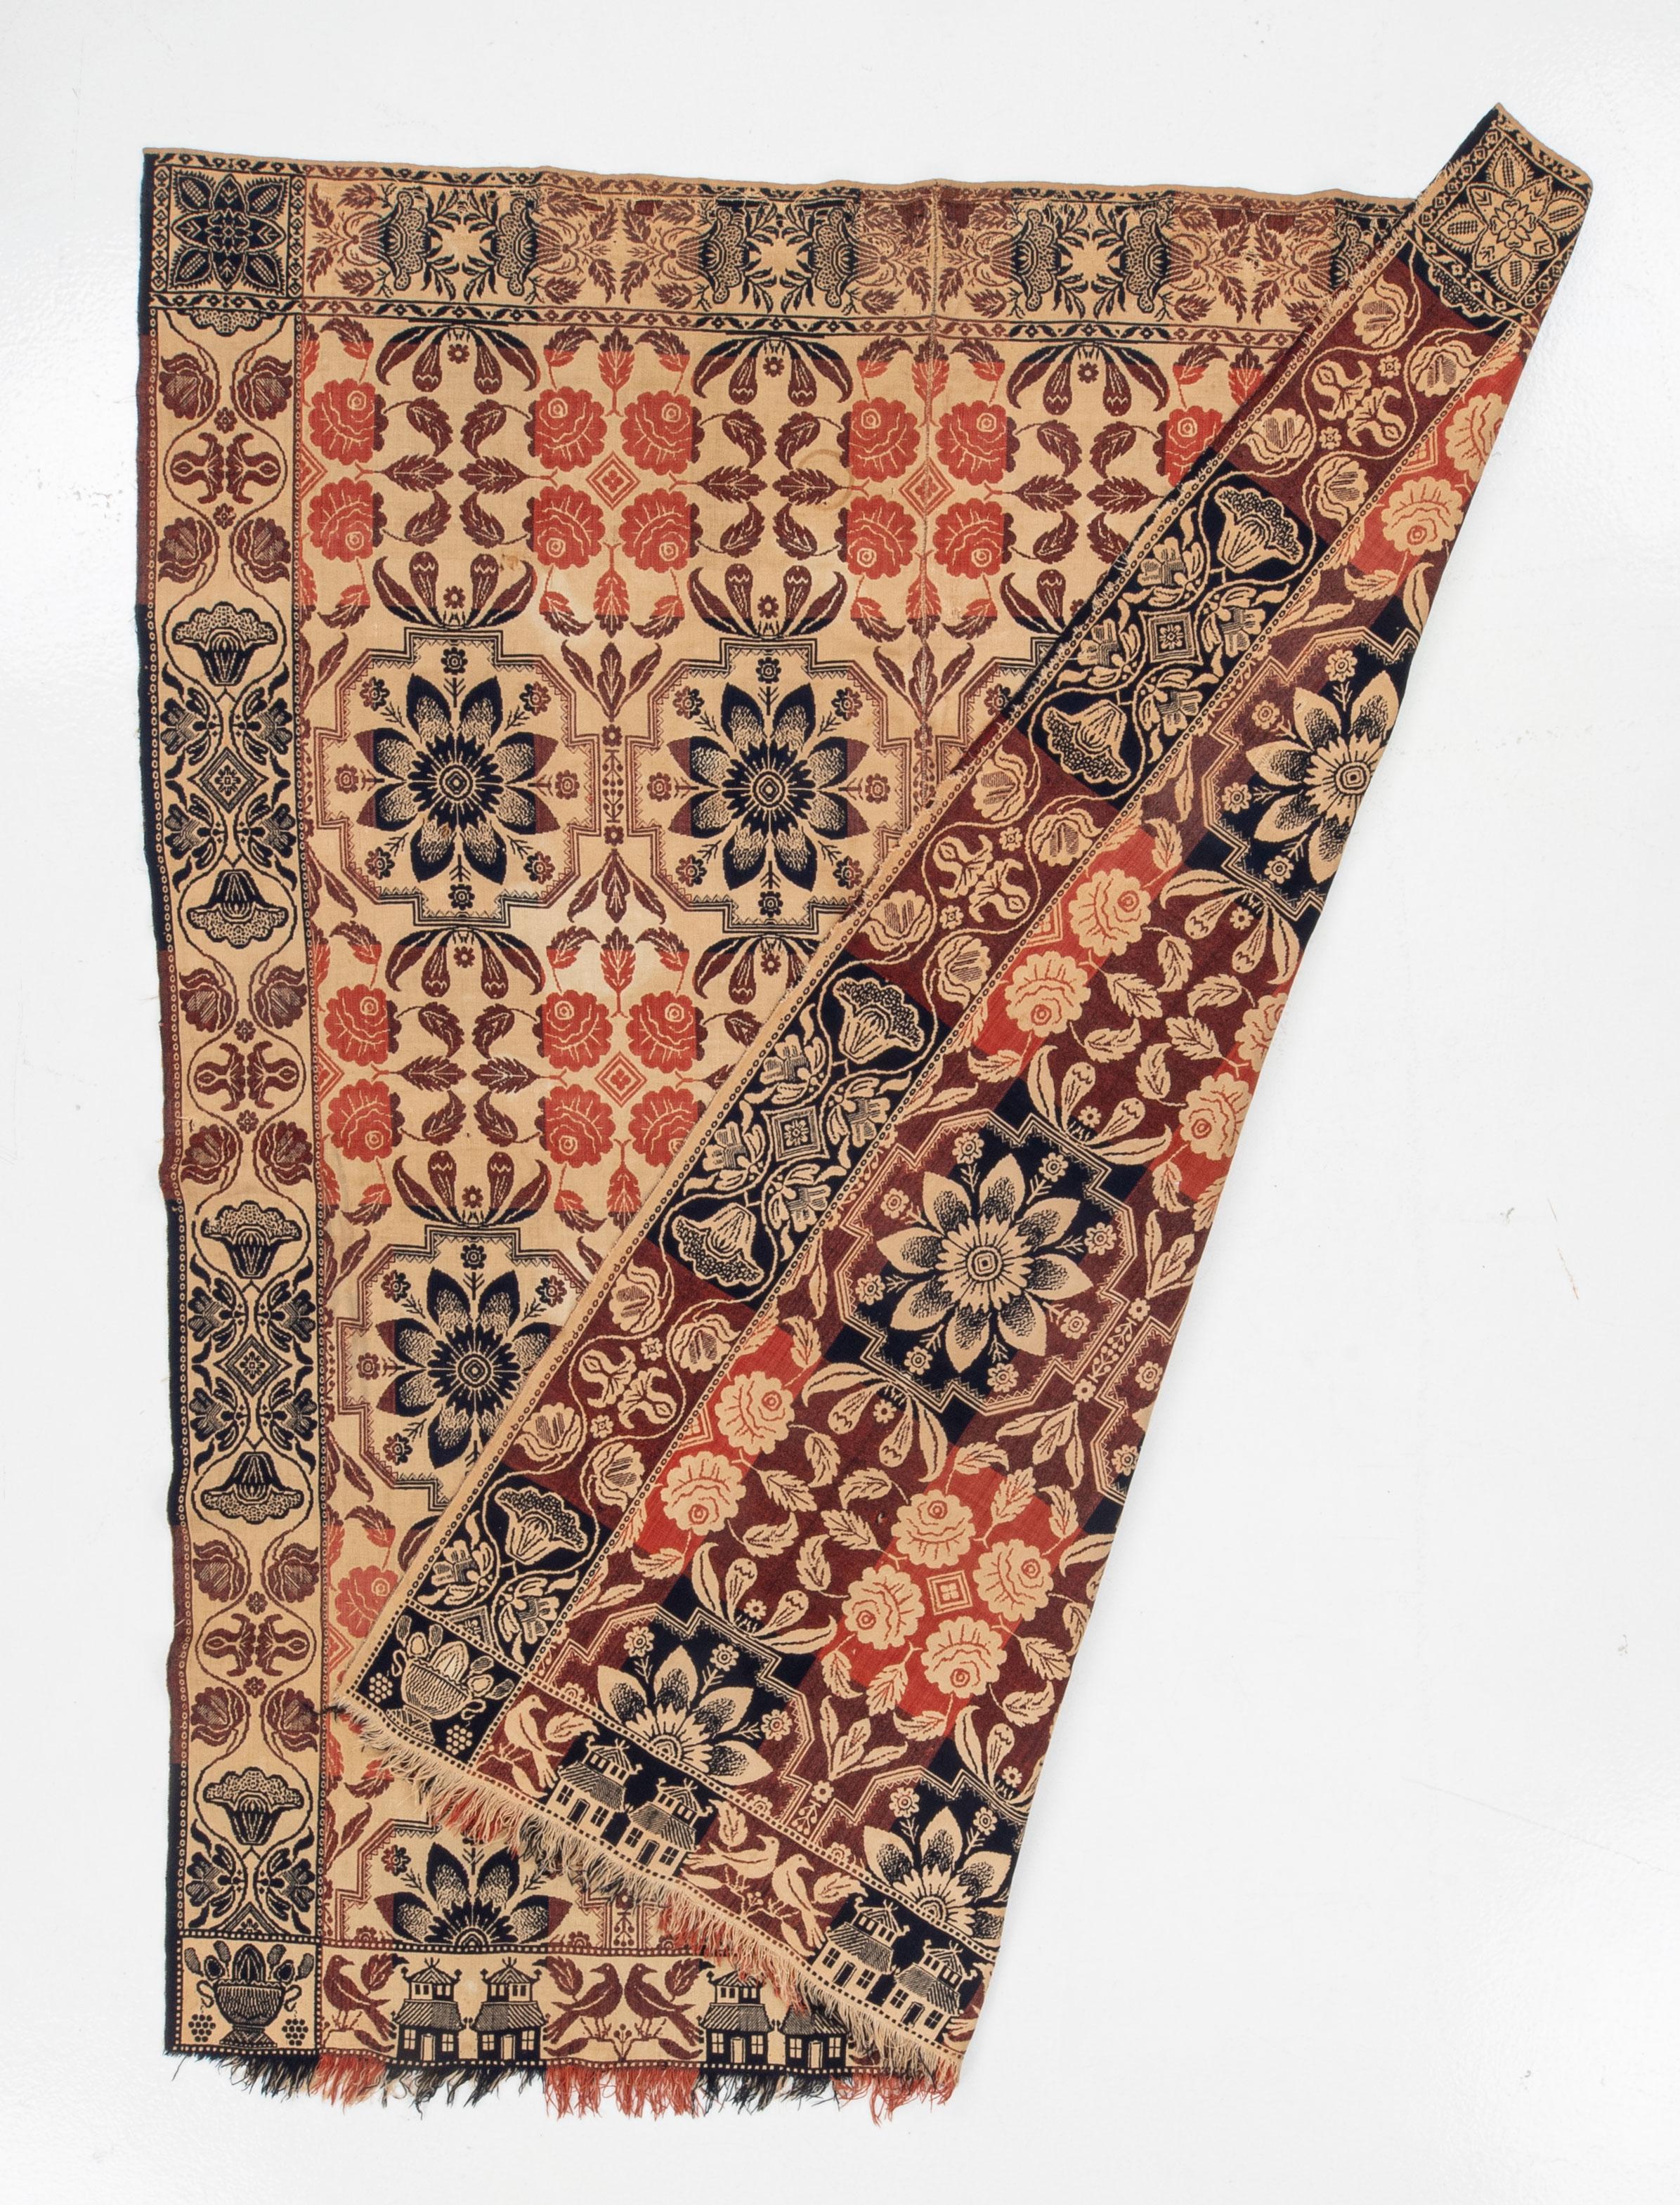 Jaquard Woven American Coverlet 19th C. In Good Condition For Sale In Istanbul, TR